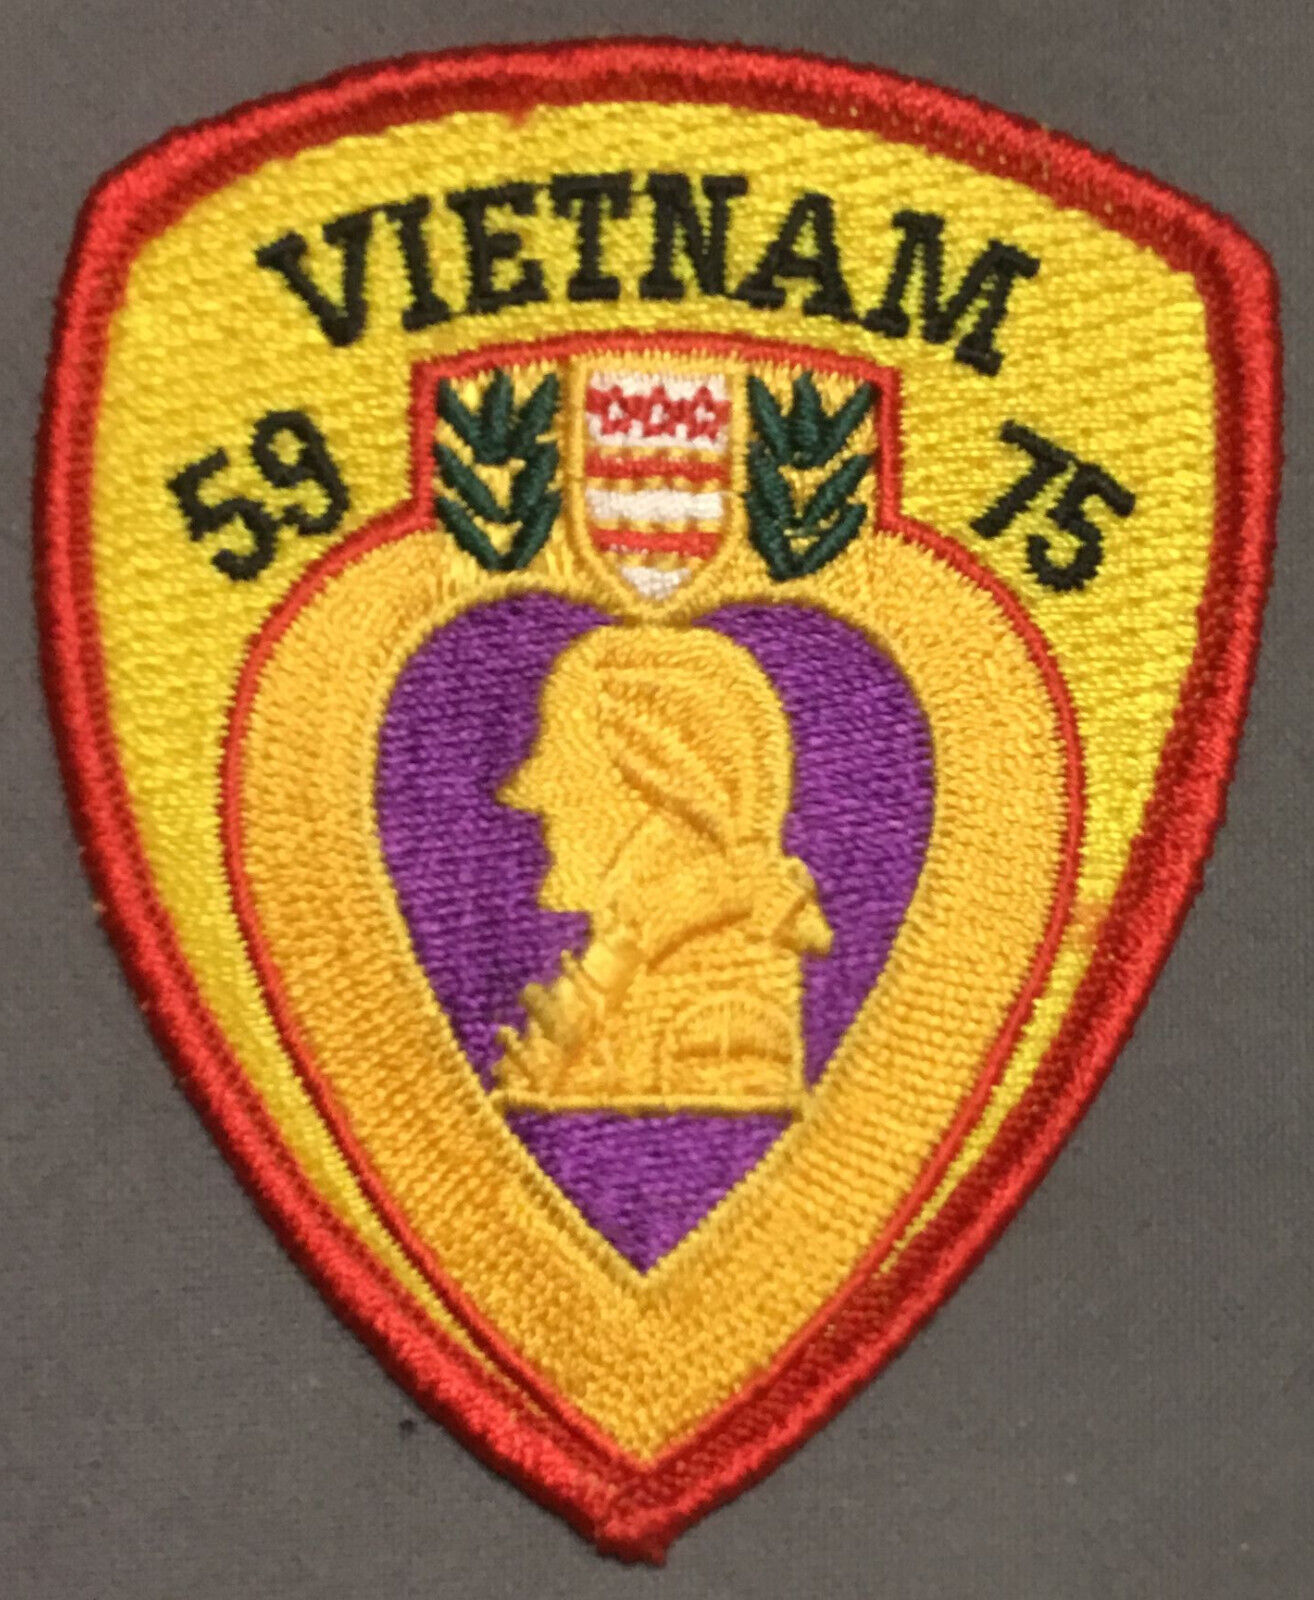 VIETNAM PURPLE HEART Patch      SPECIAL PURCHASE          SHOWROOM CLEARANCE SAL